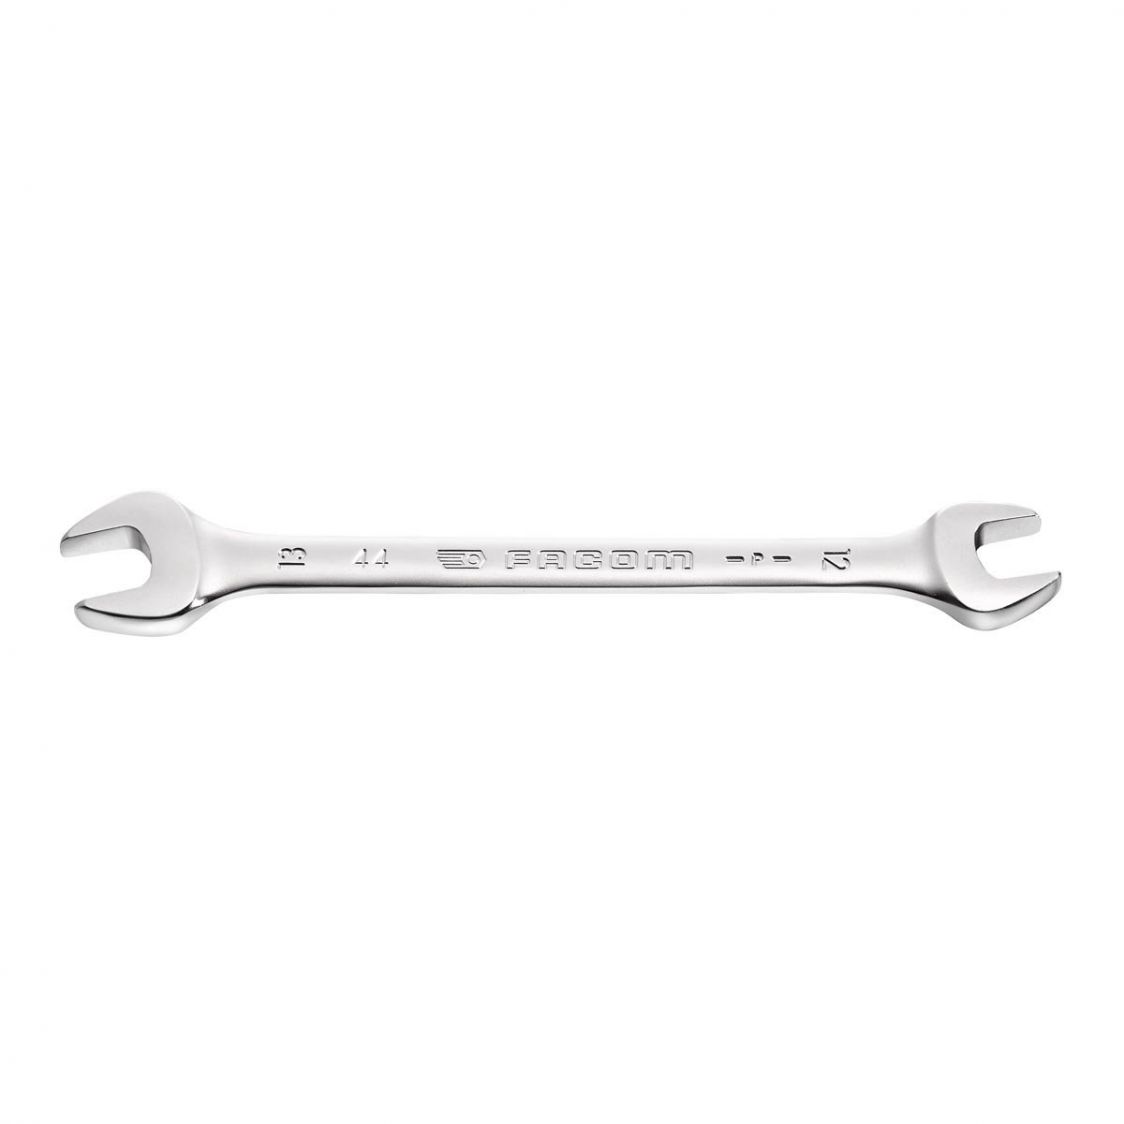 FACOM 44.8X9 - 8x9mm Metric Open Jaw Spanner